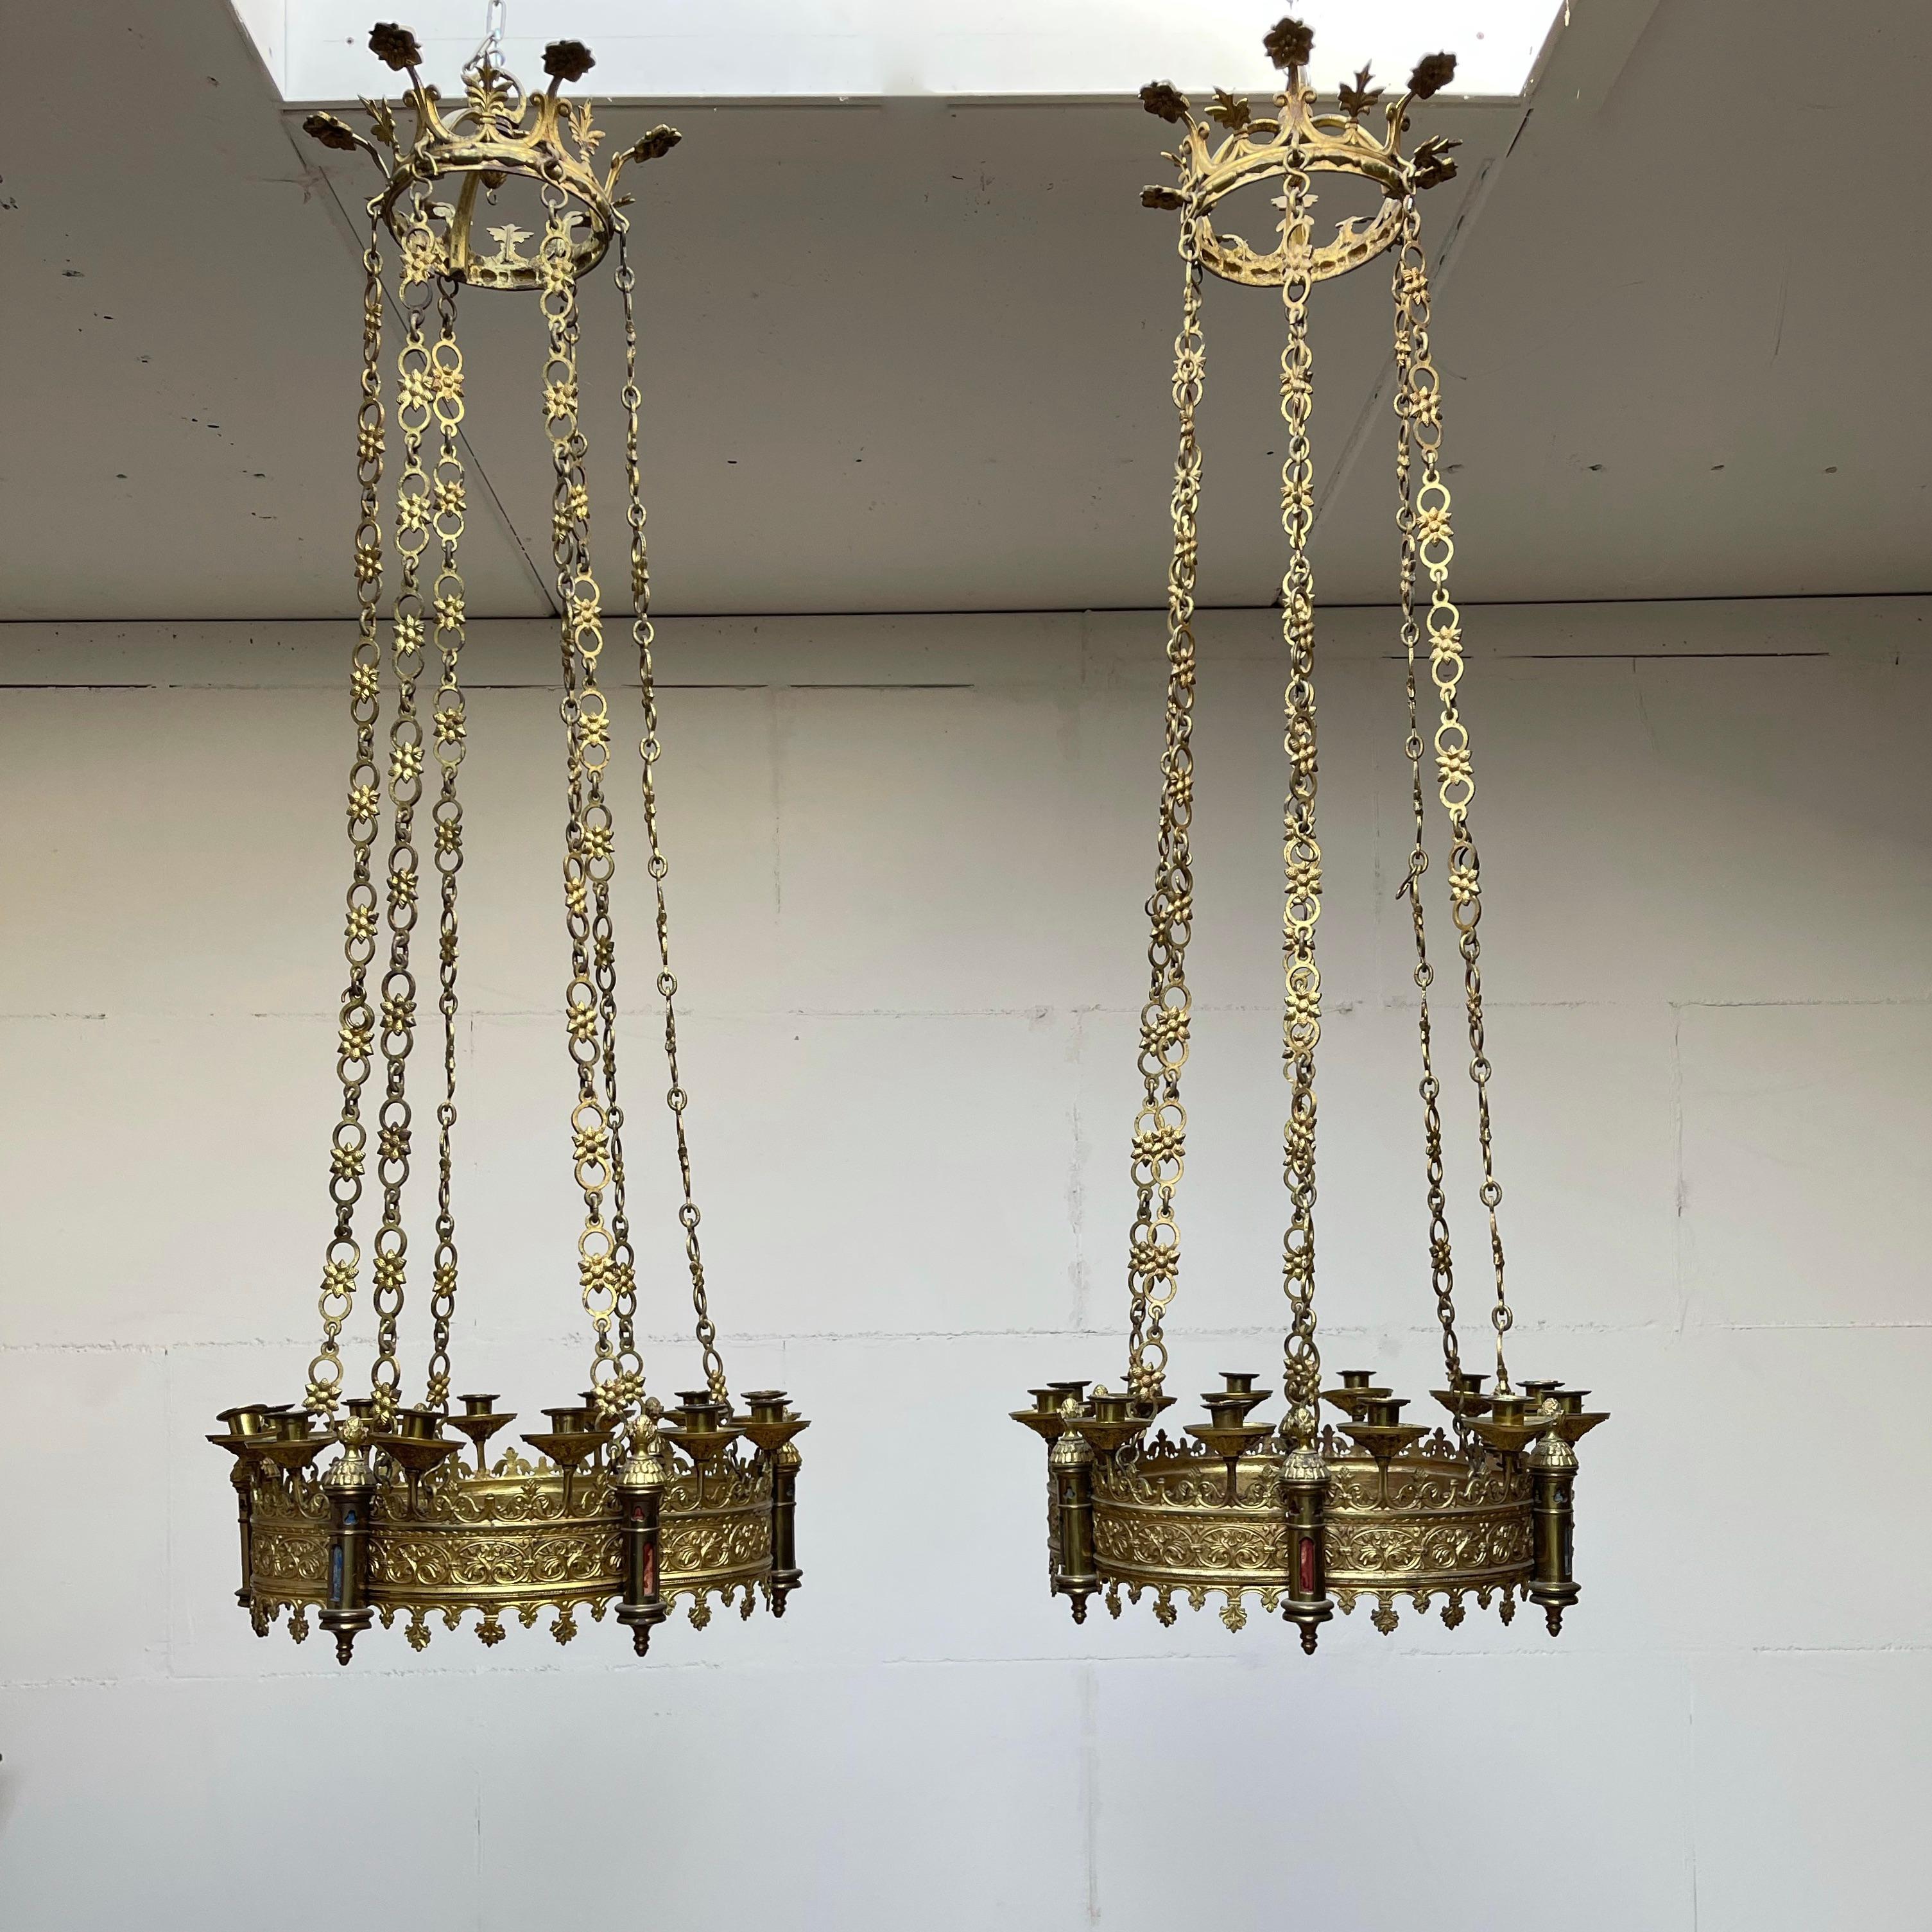 Rare & Striking Pair Gilt Bronze Gothic Revival Advent Wreath Candle Chandeliers 11